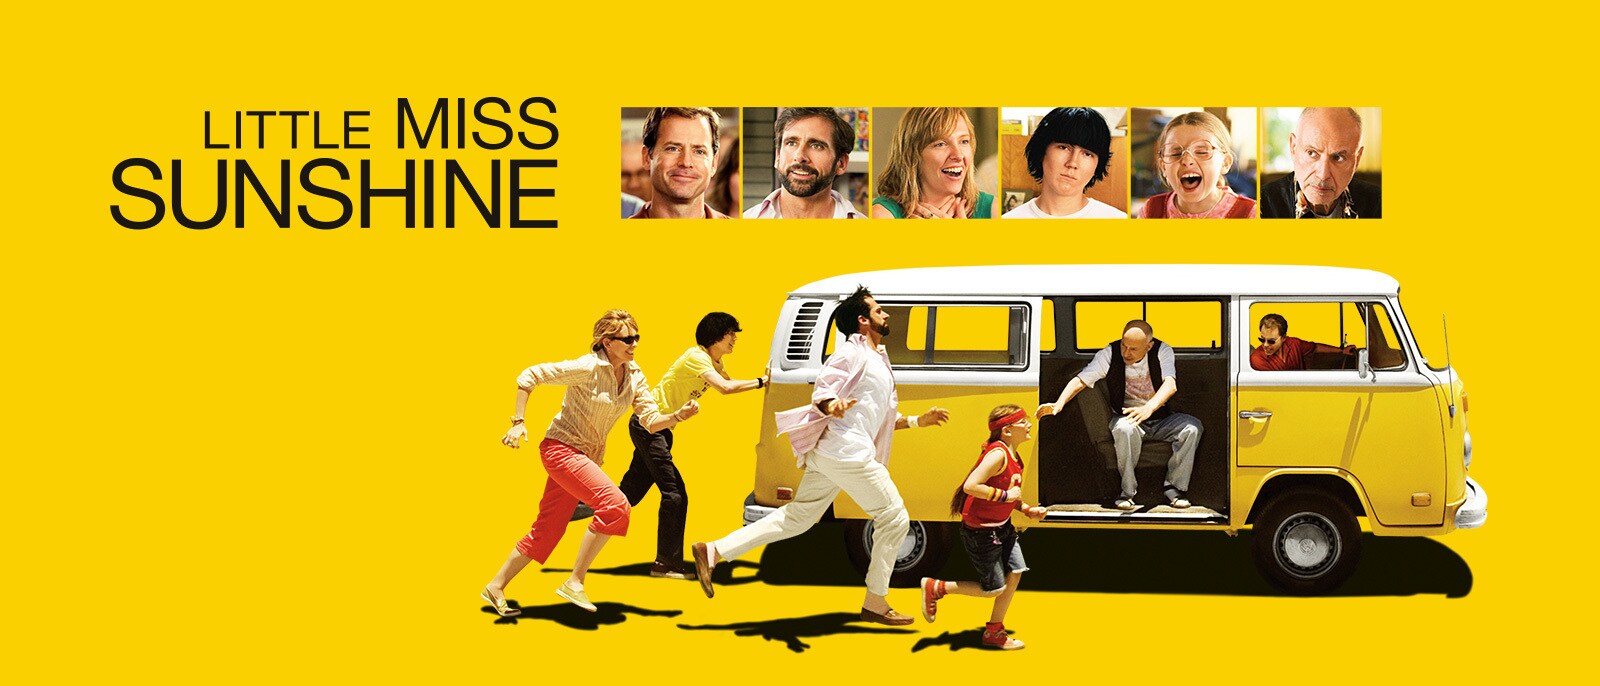 41-facts-about-the-movie-little-miss-sunshine